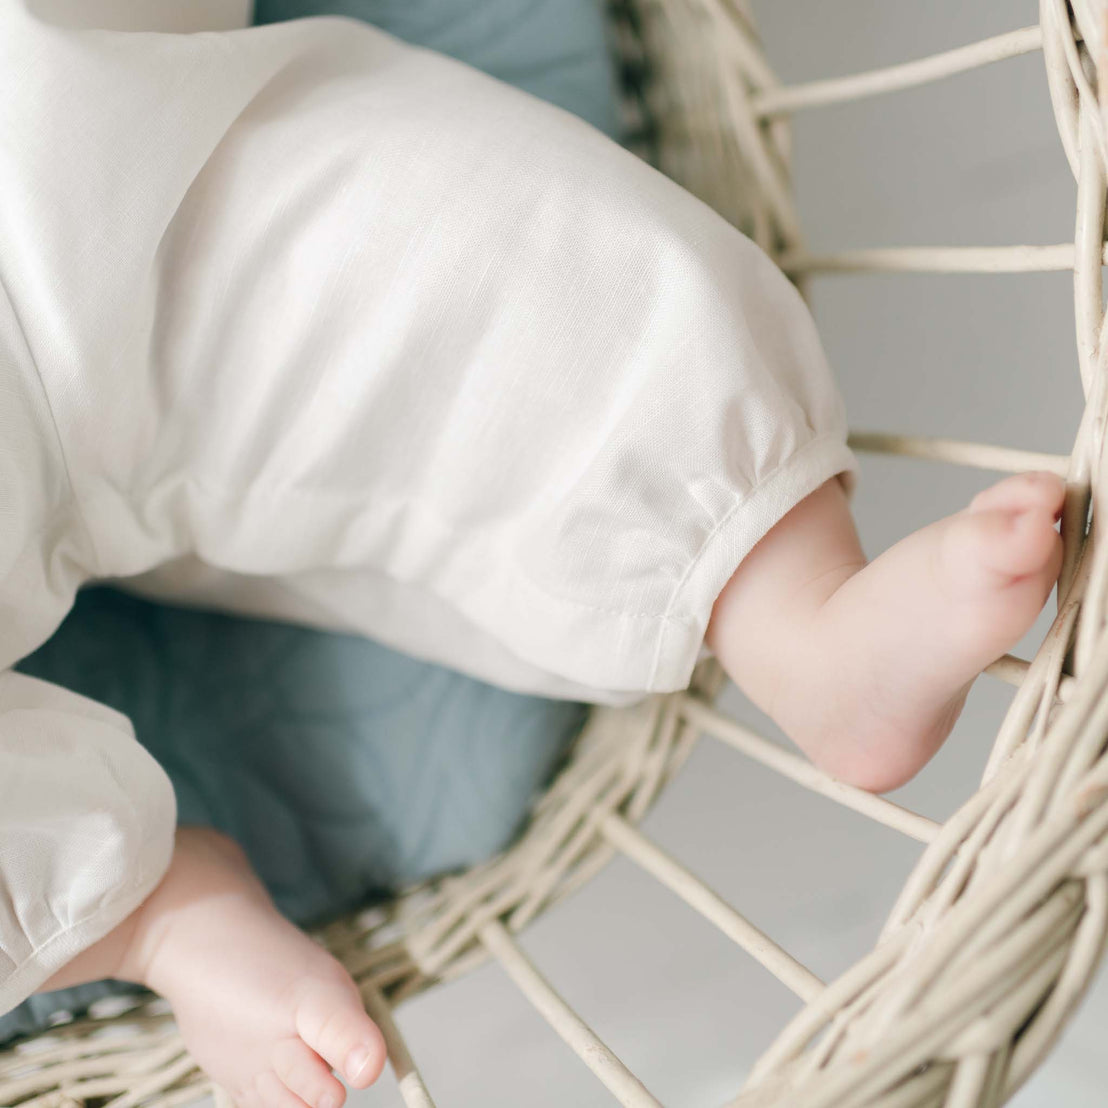 A close-up image of a baby's feet and legs clad in the Owen Linen Romper, sitting in a wicker basket against a light background.